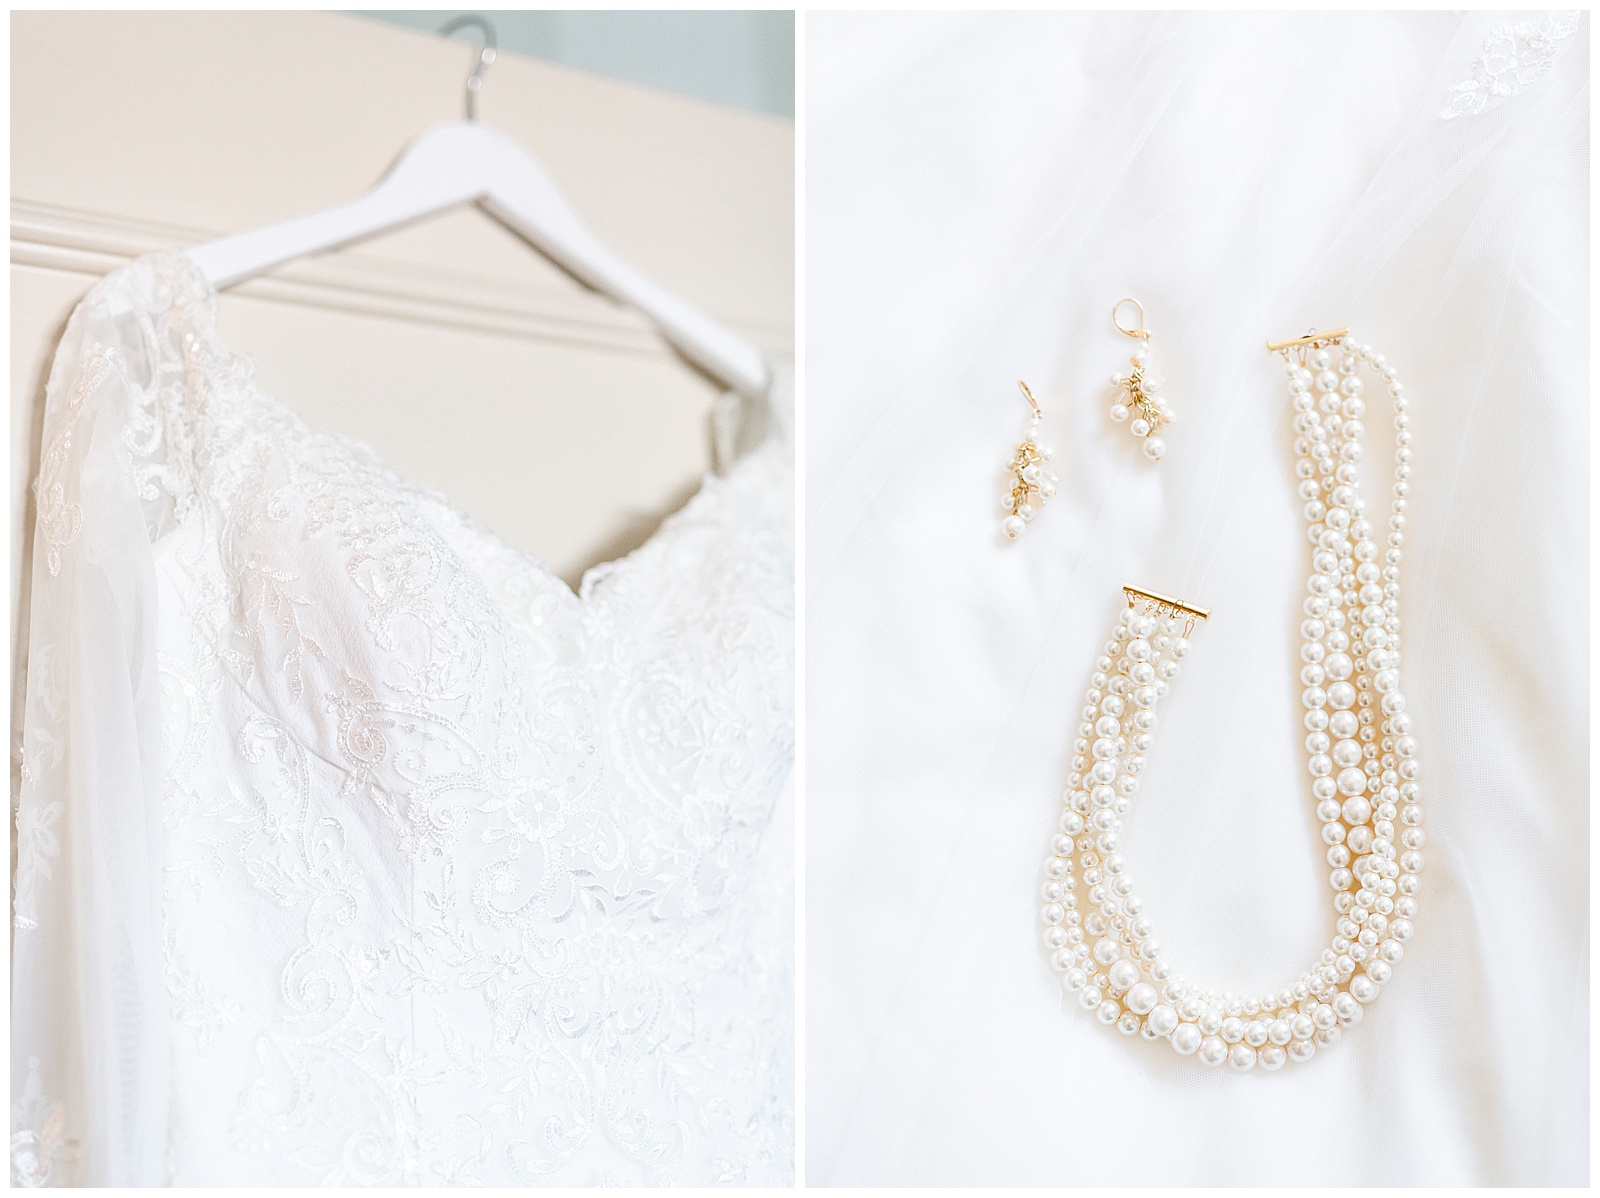 💍 detail shot of lace wedding dress and string of pearls necklace wedding jewelry 💍 Bright Colorful Summer City Wedding in Charlotte, NC with Taryn and Ryan | Kevyn Dixon Photography